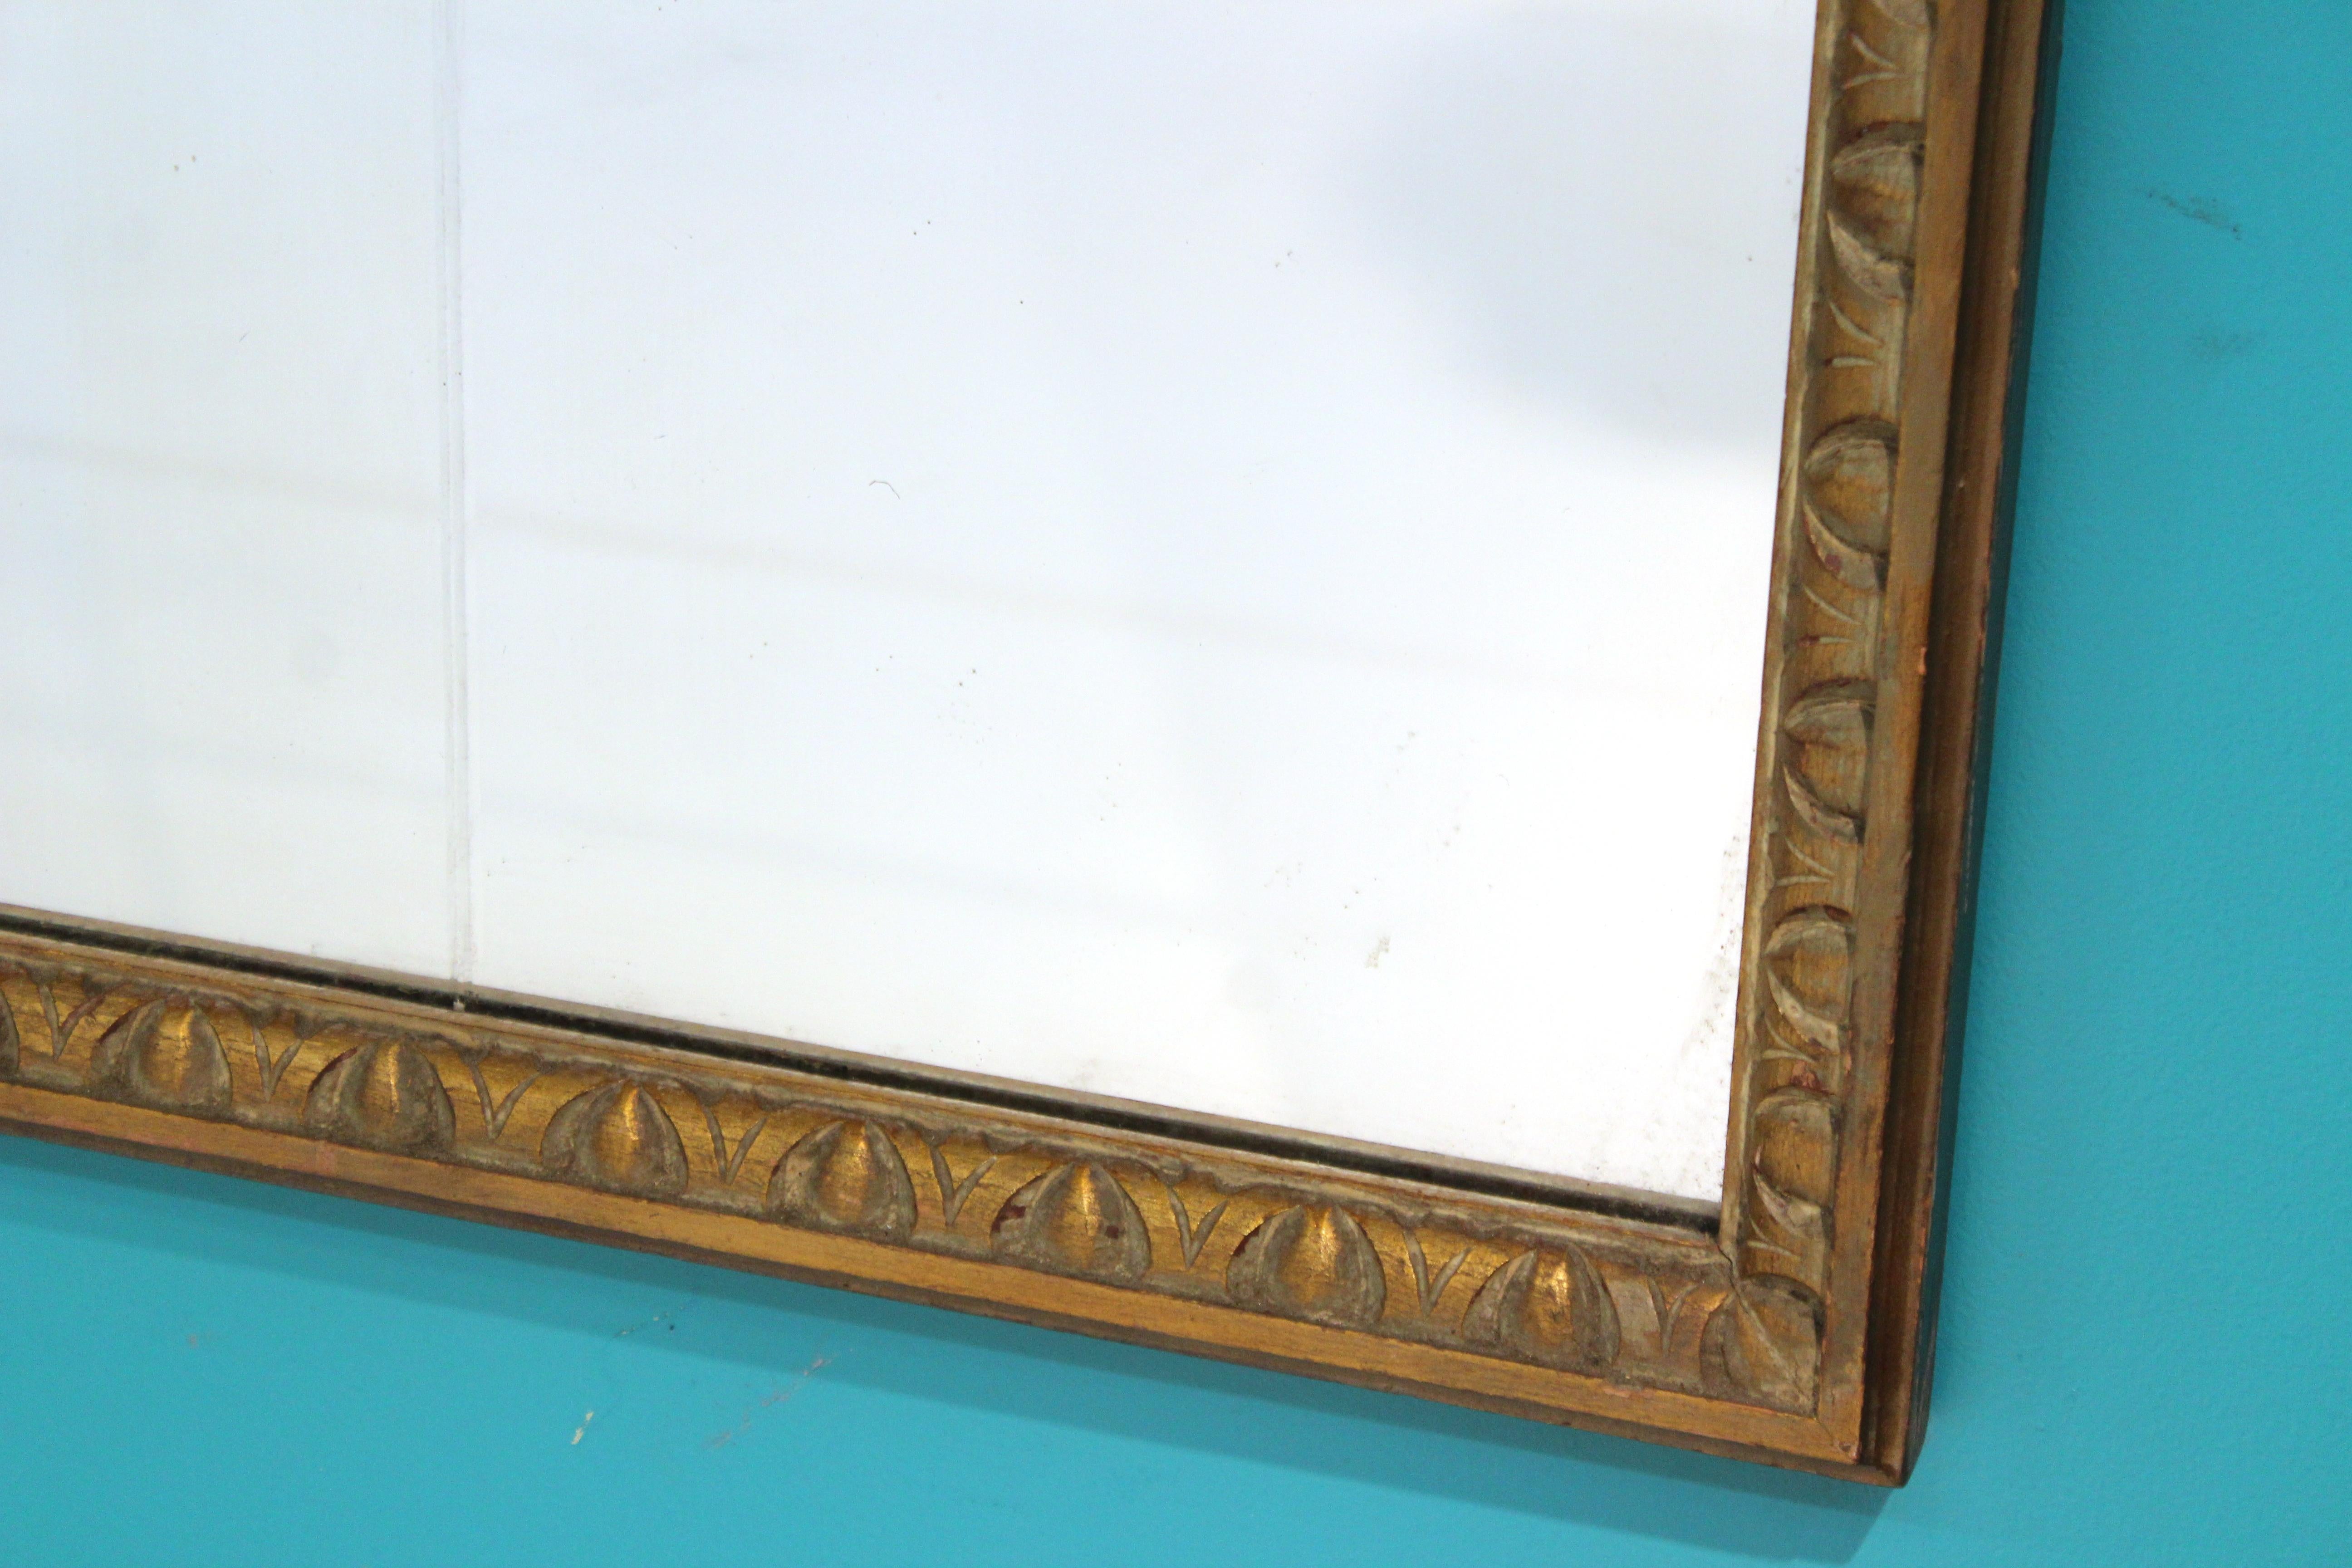 American Art Deco Etched Mirror with Wooden Frame 5